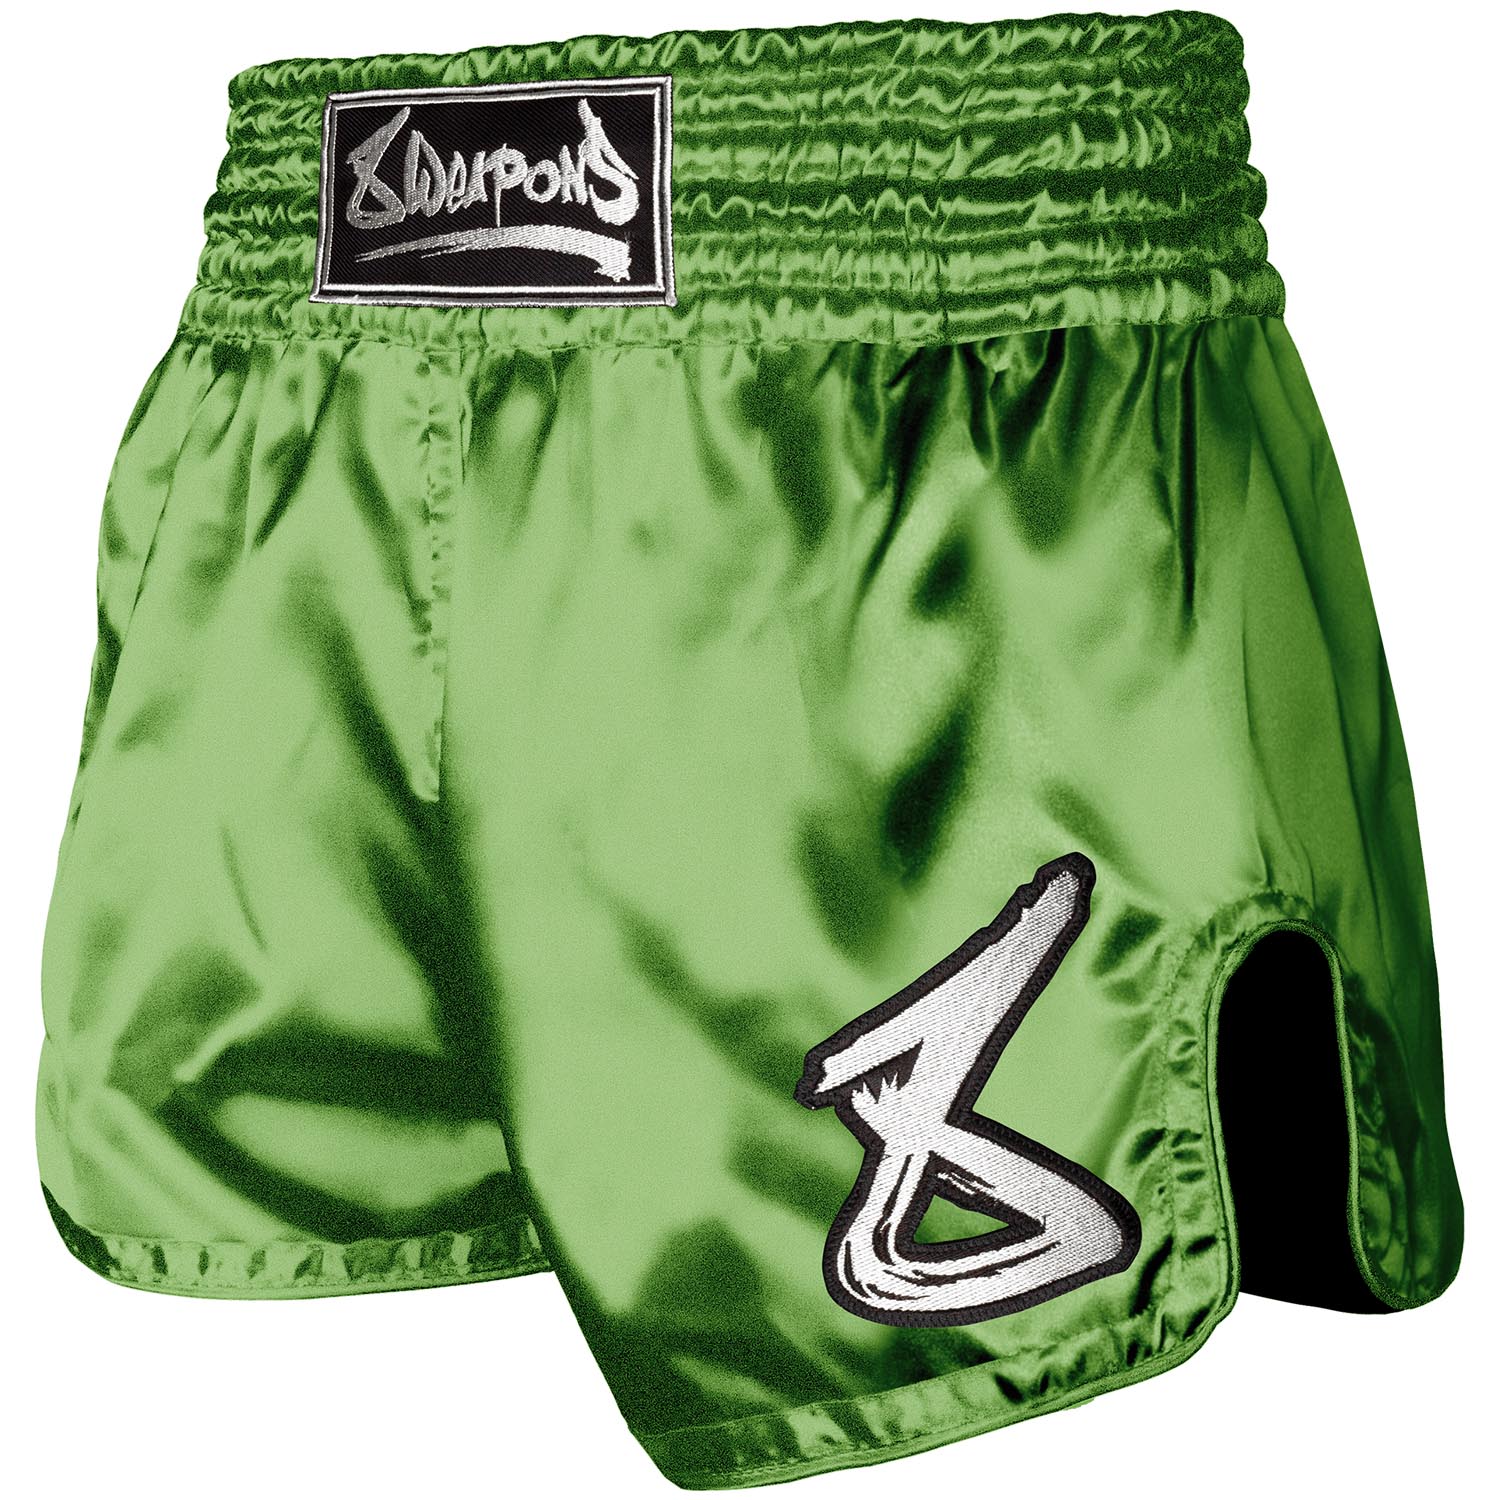 8 WEAPONS Strike Shorts, green